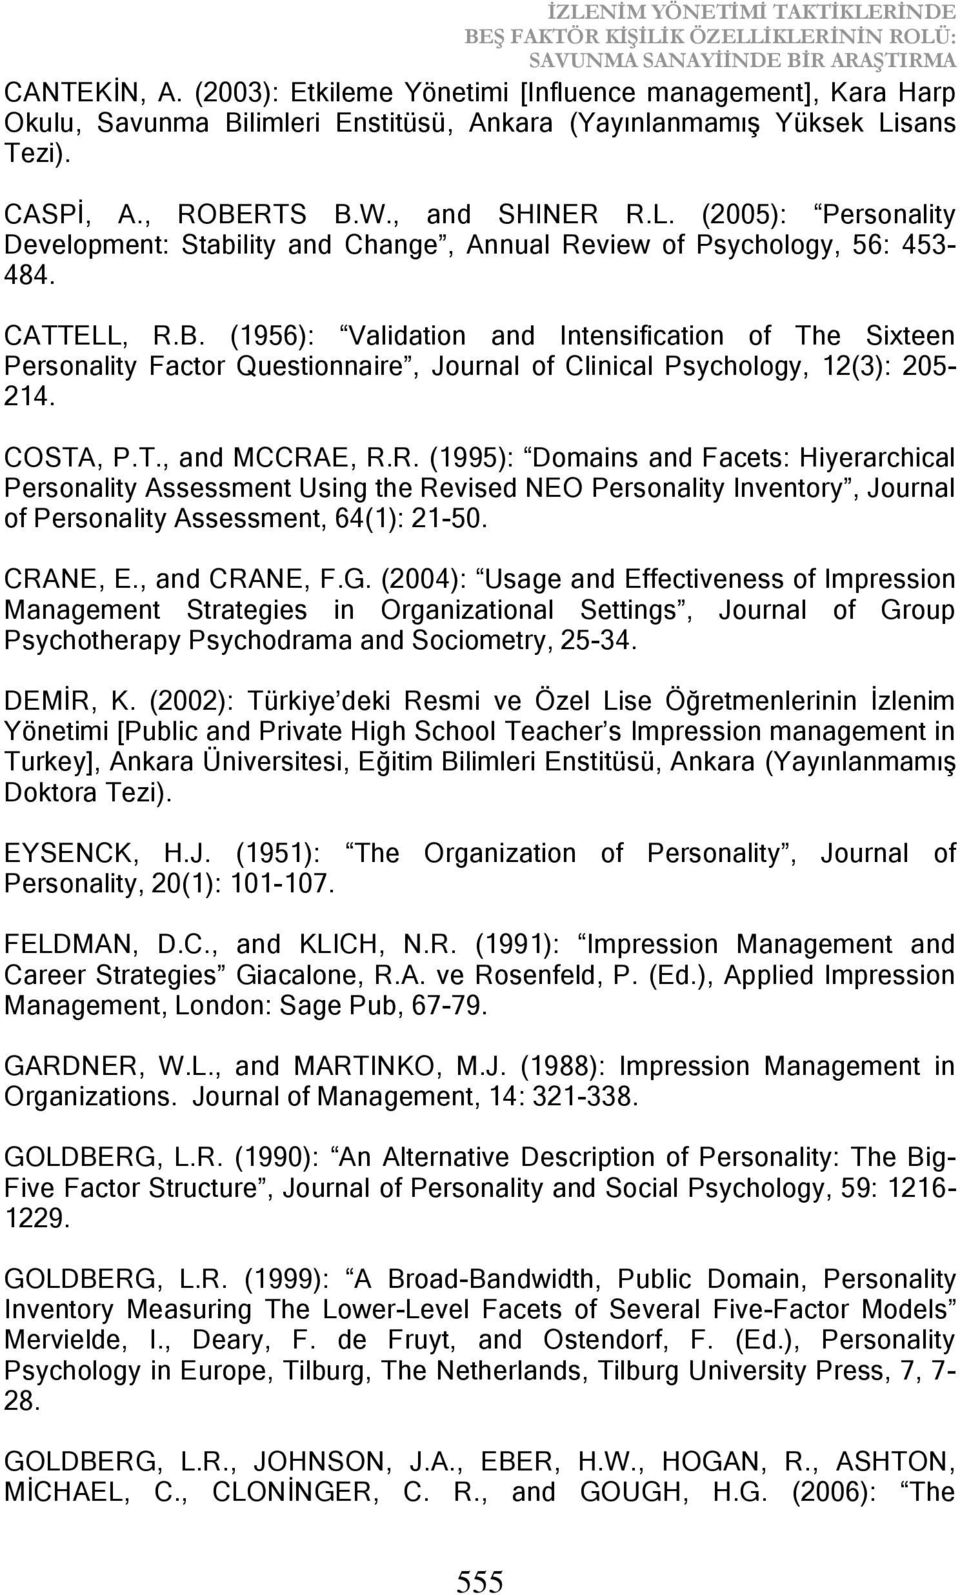 sans Tezi). CASPİ, A., ROBERTS B.W., and SHINER R.L. (2005): Personality Development: Stability and Change, Annual Review of Psychology, 56: 453-484. CATTELL, R.B. (1956): Validation and Intensification of The Sixteen Personality Factor Questionnaire, Journal of Clinical Psychology, 12(3): 205-214.